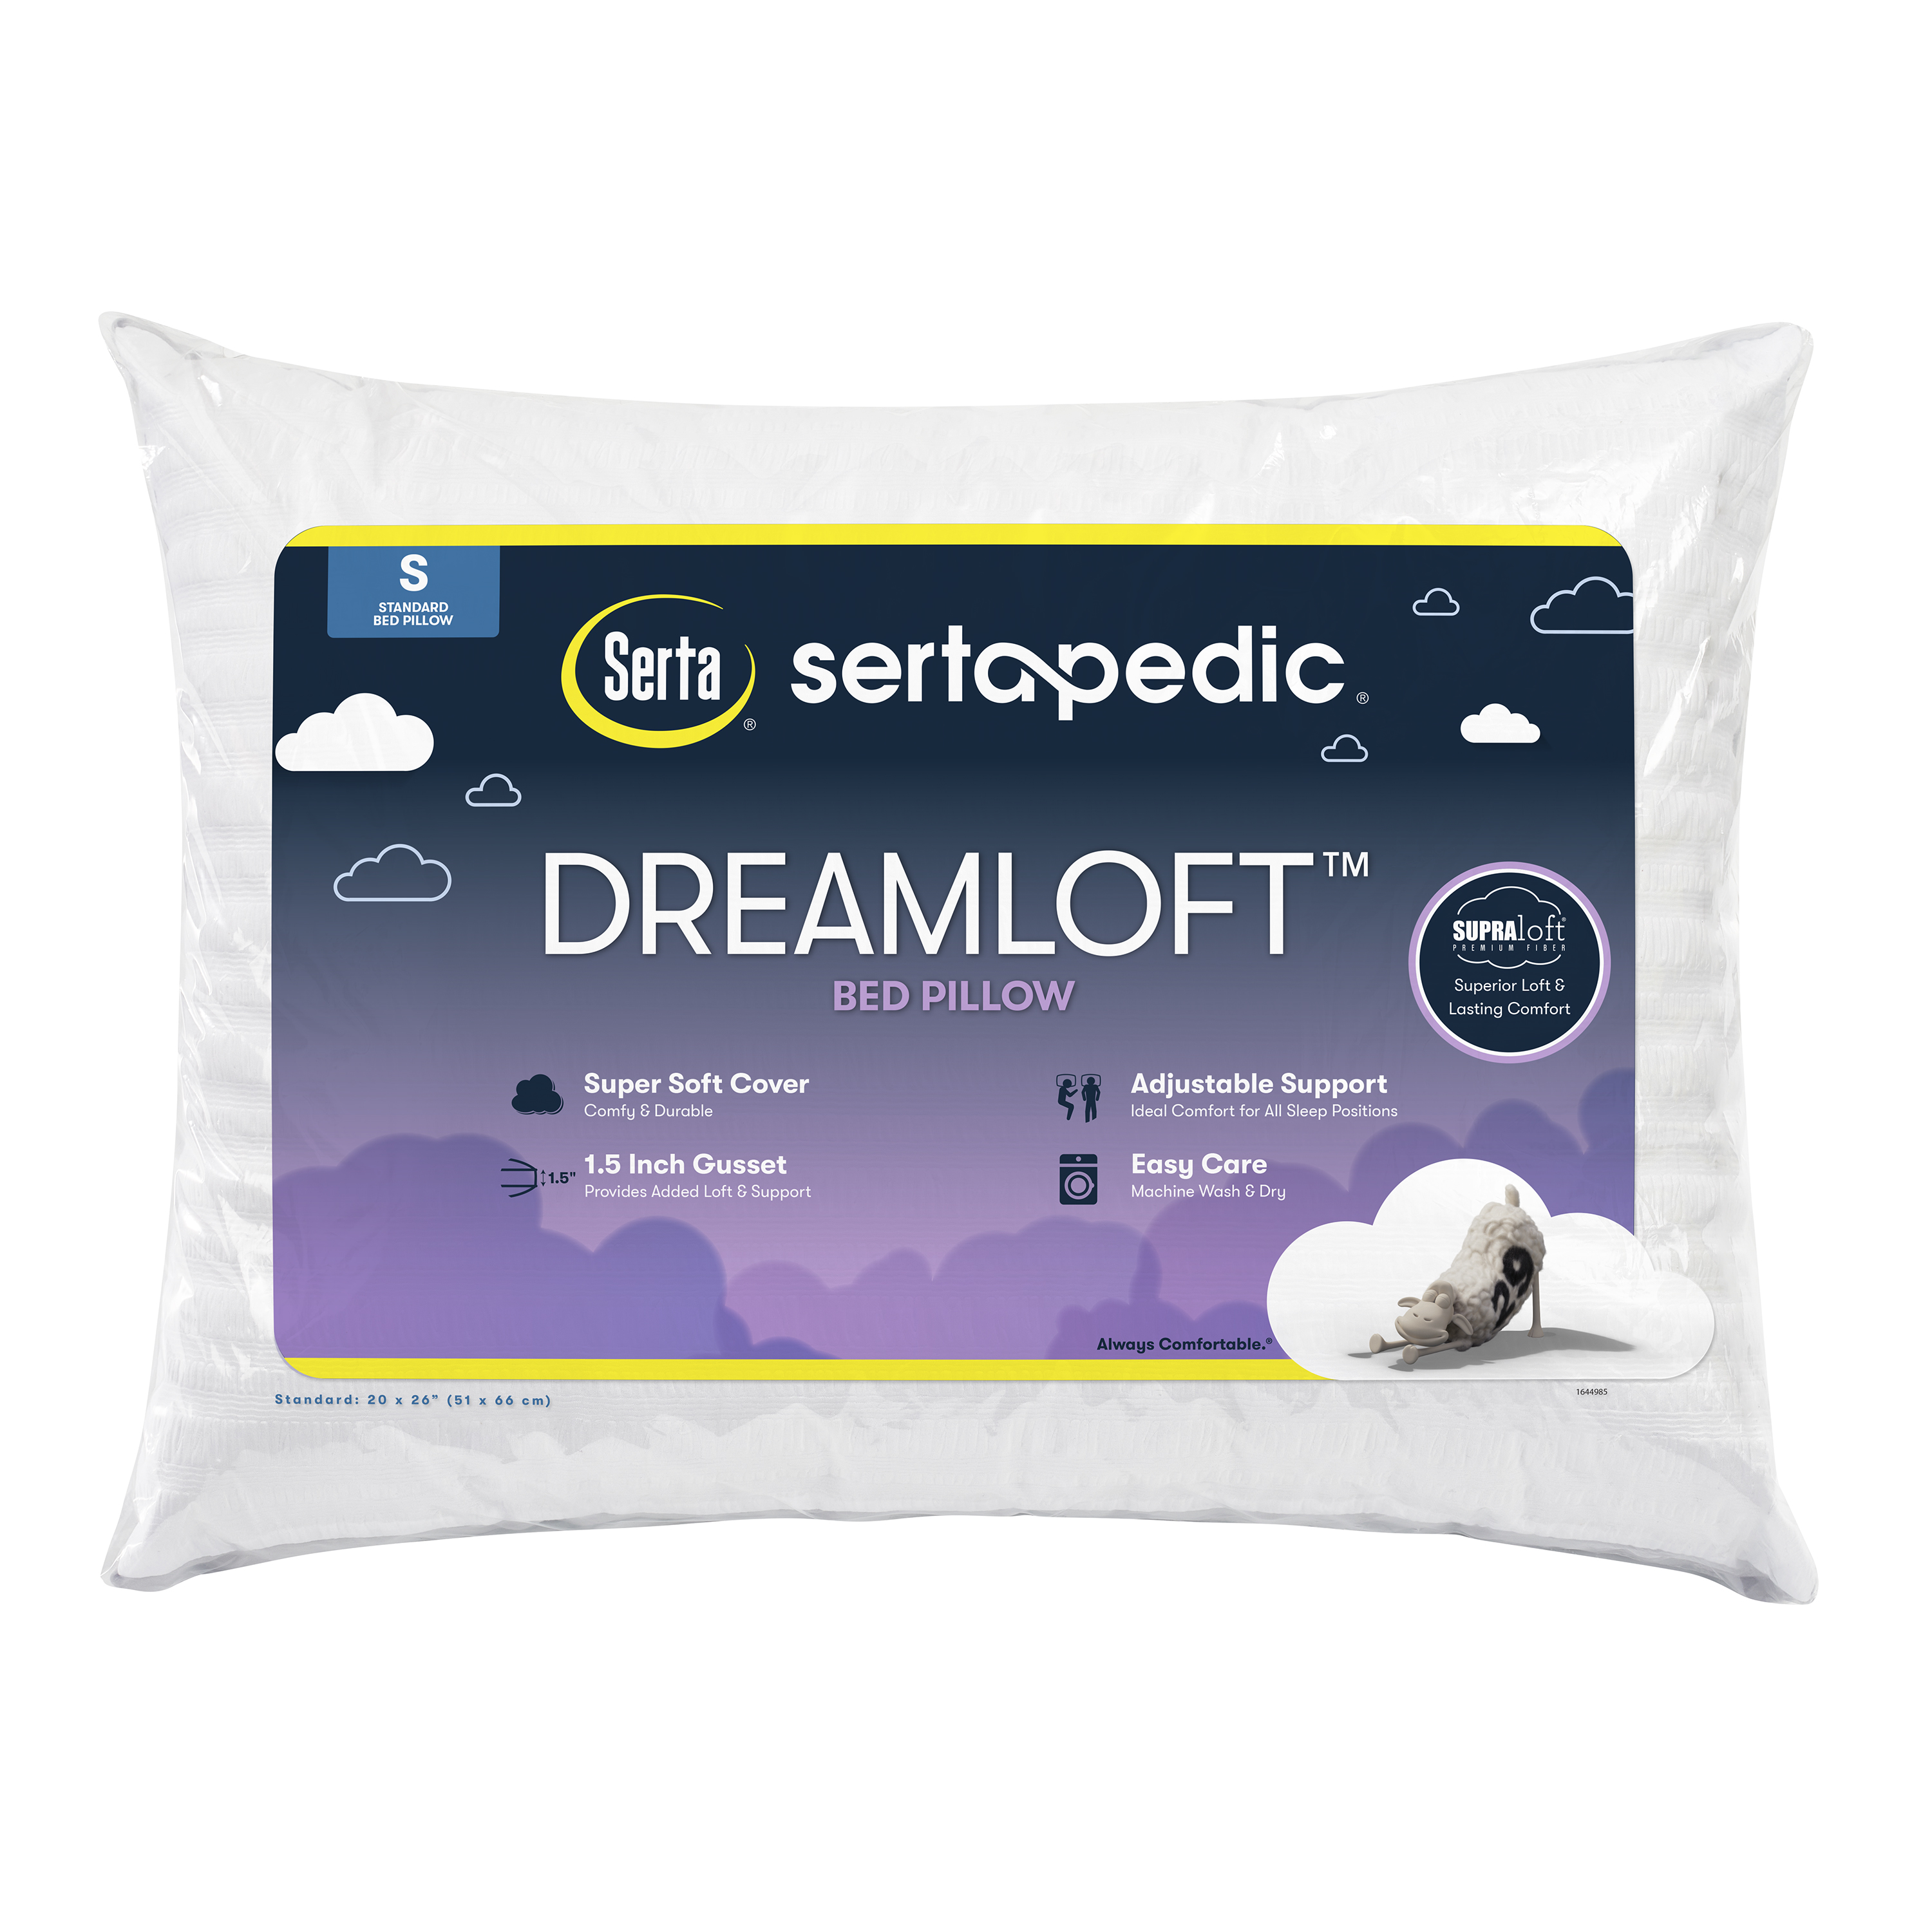 SertaPedic Dreamloft Bed Pillow, Polyester Fill, All Ages, Standard Size (20"x26") - image 1 of 6